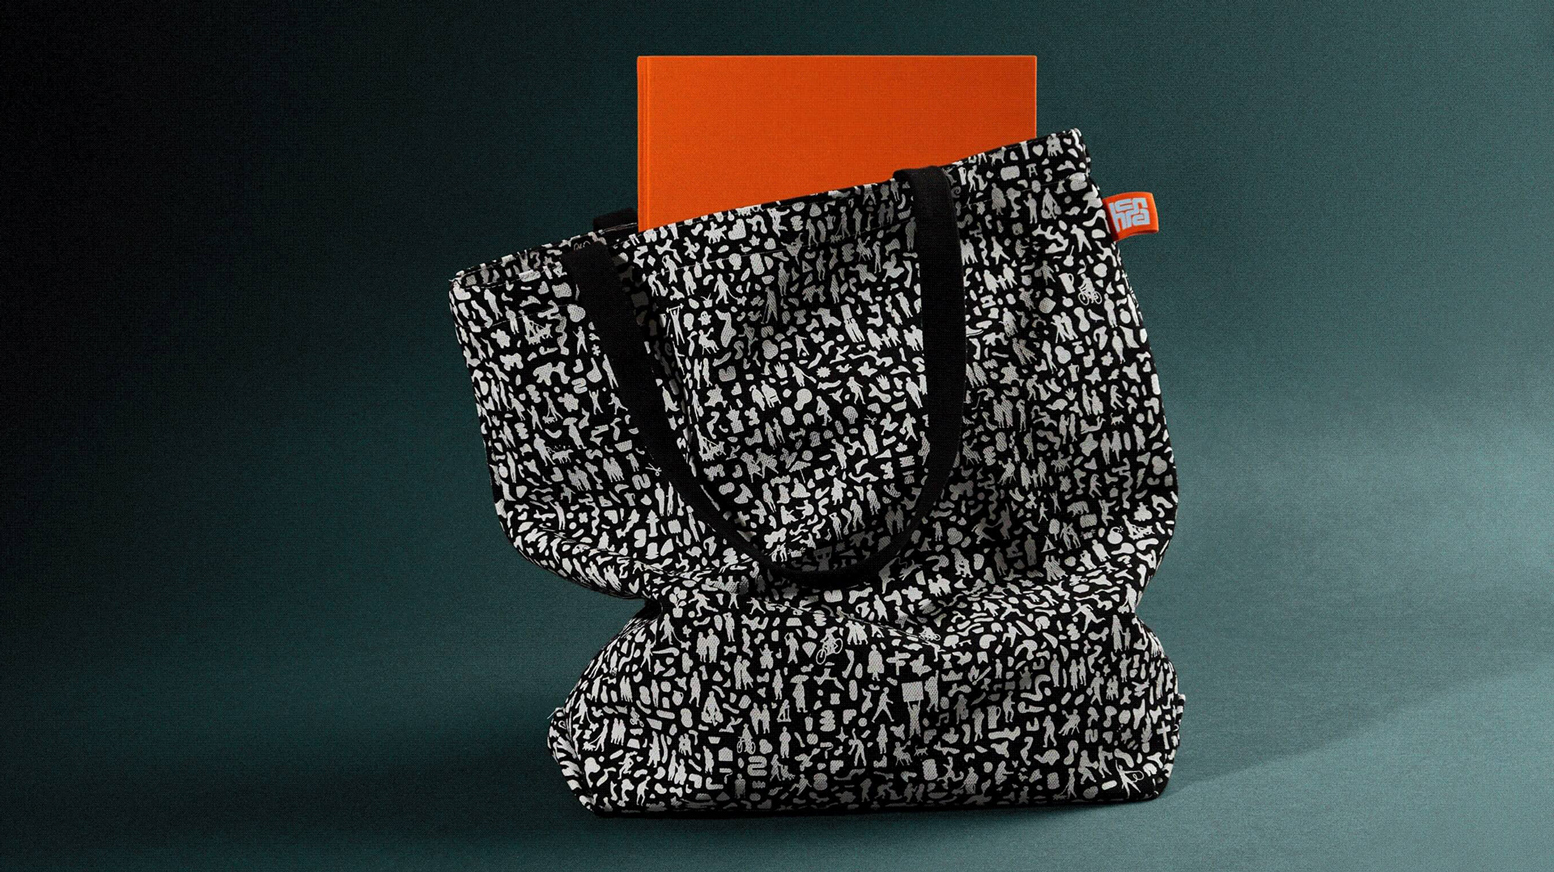 HCMA branded tote bag with a red book sticking out of it. The bag is black with white silhouettes of people and objects shrunken down and tightly squeezed together as a pattern.